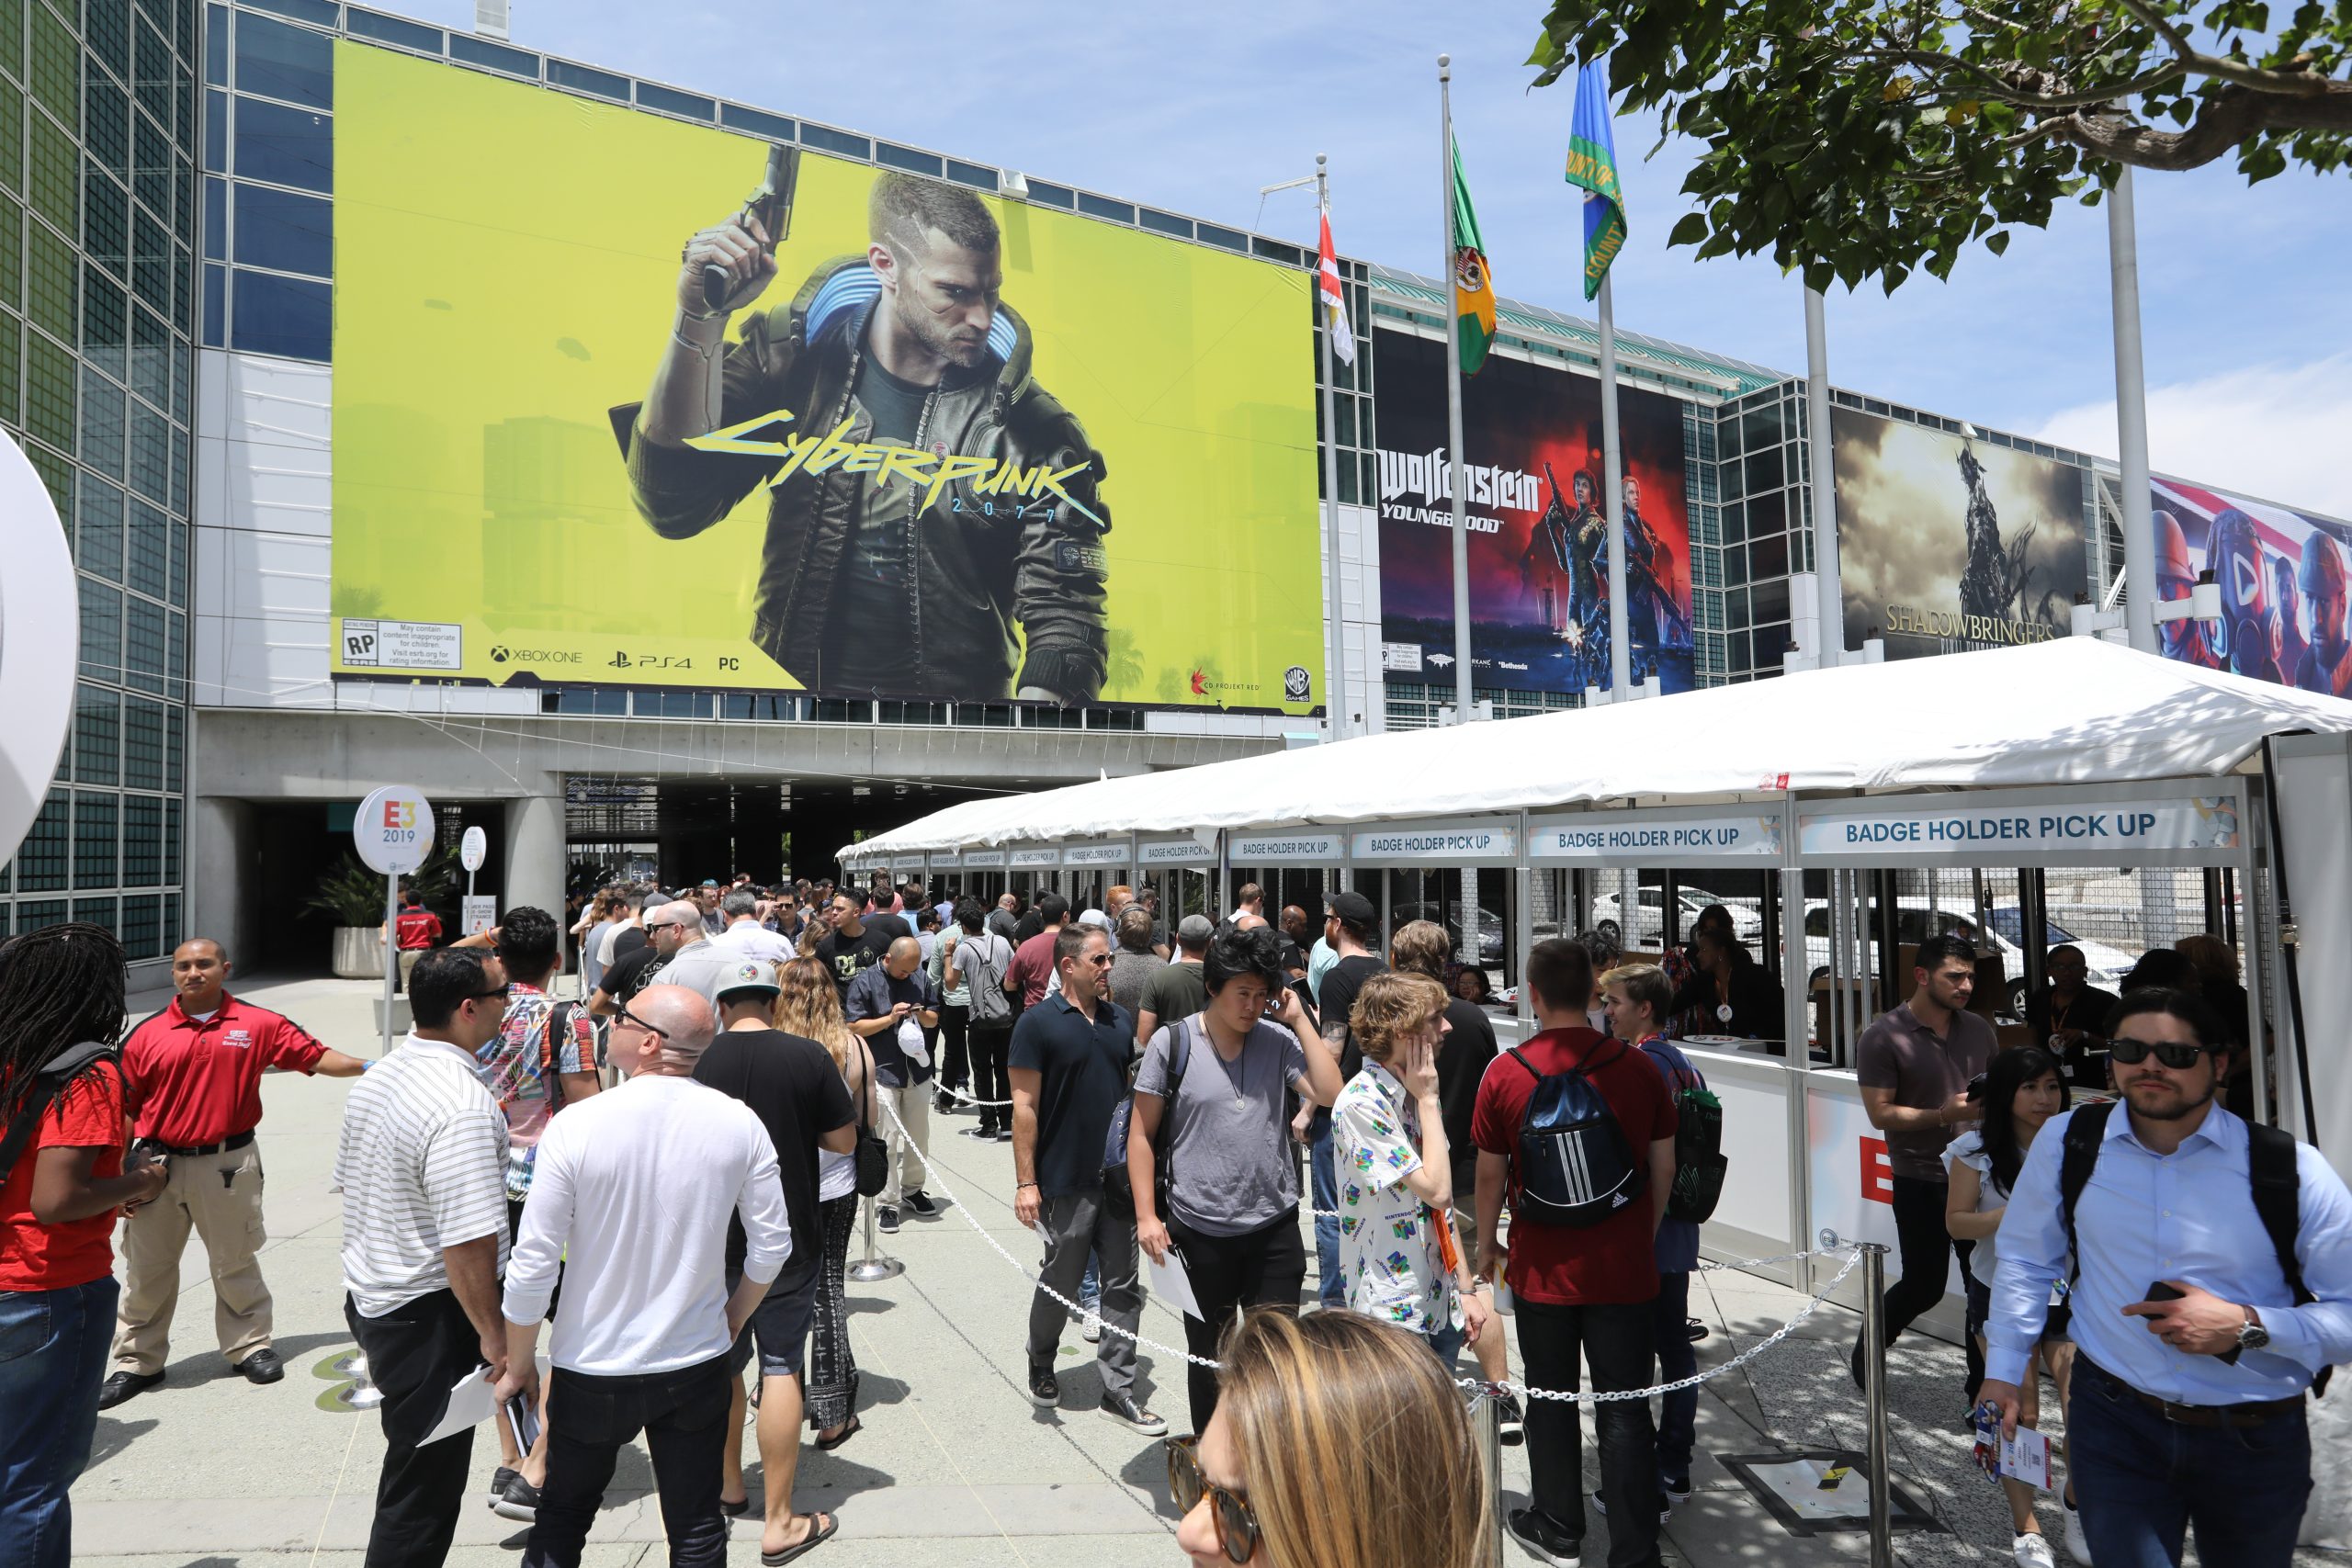 ESA looking to make big changes to E3 experience